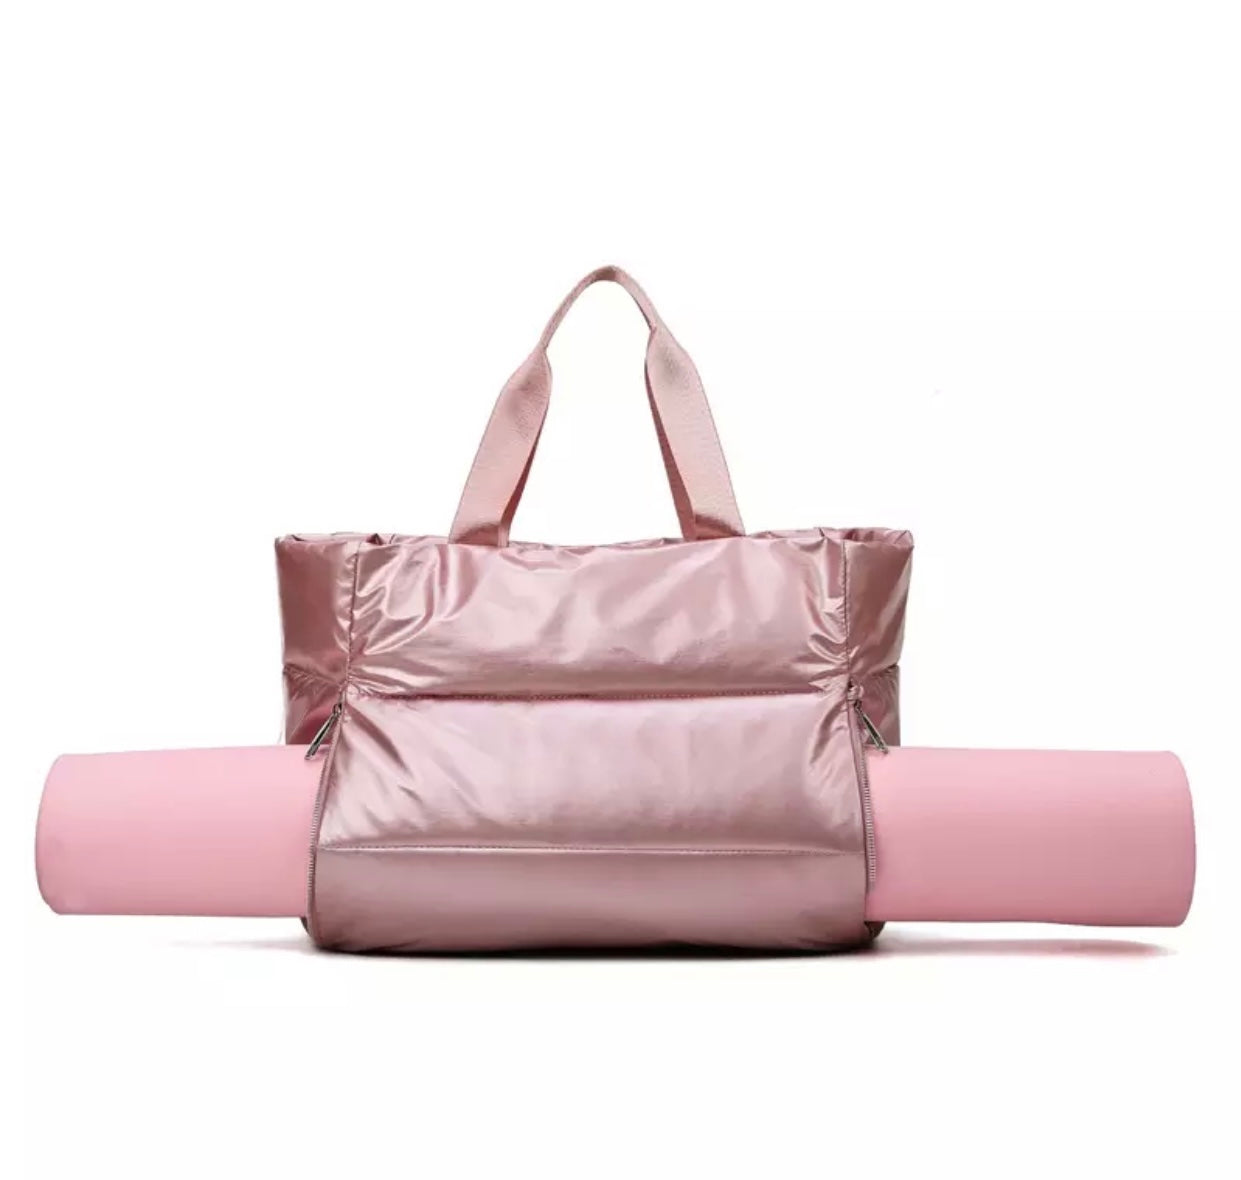 Large ballet, yoga dance bag in pink from The Collective Dancewear